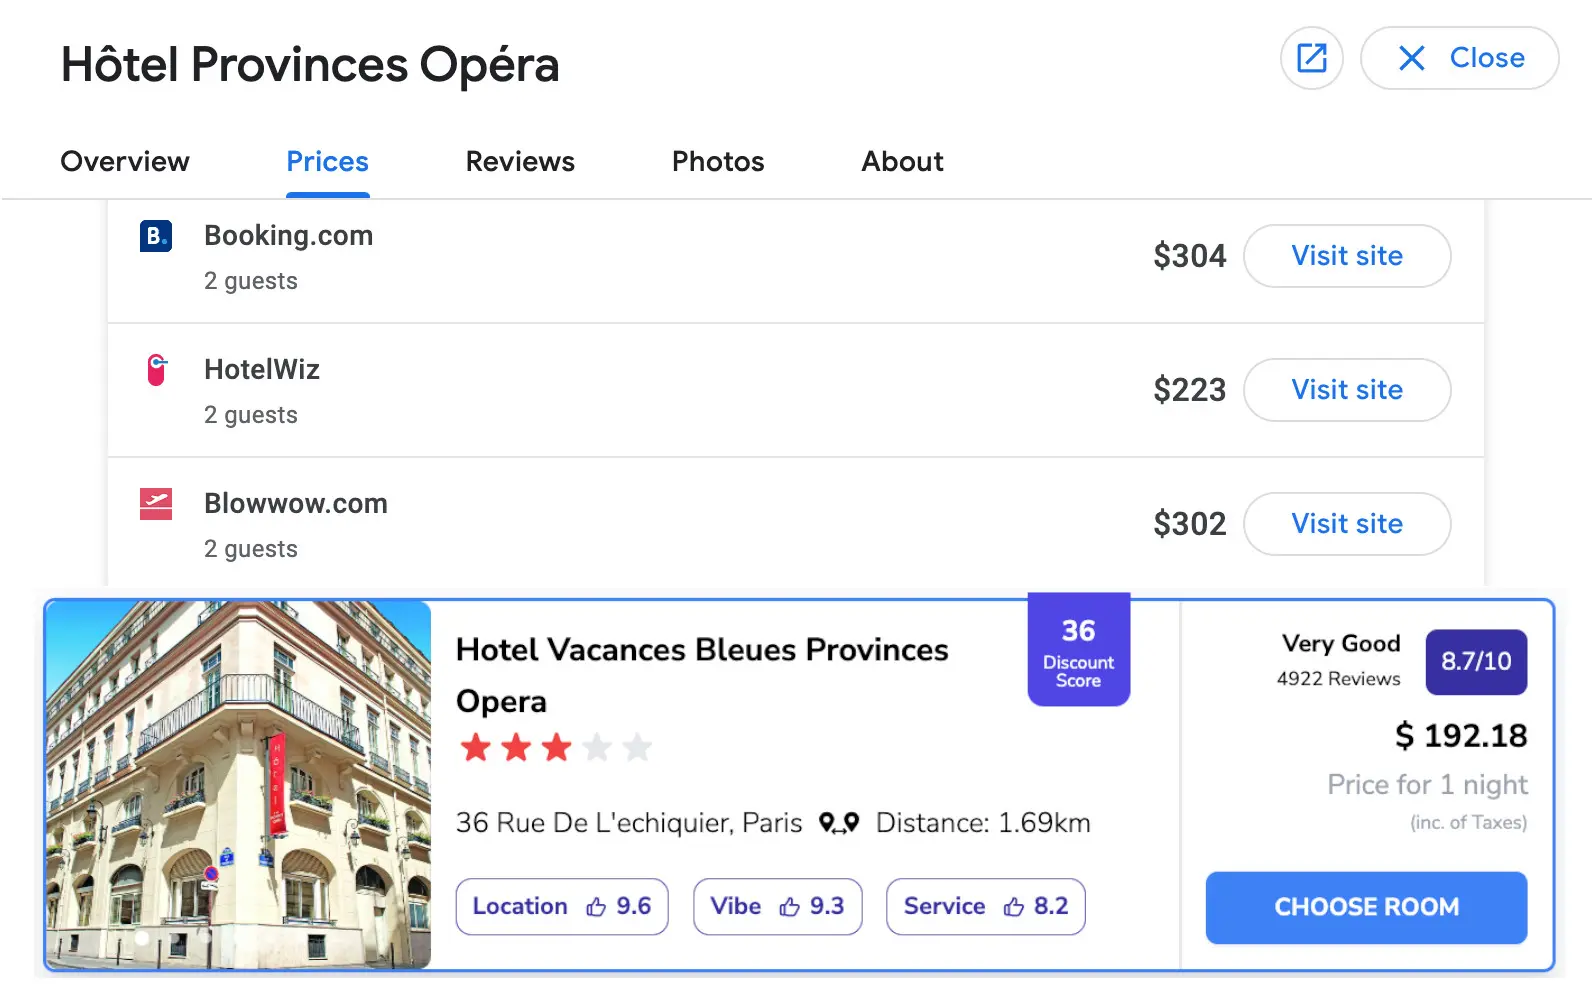 One of the most popular hotels in Paris is Hotel Provinces Opera